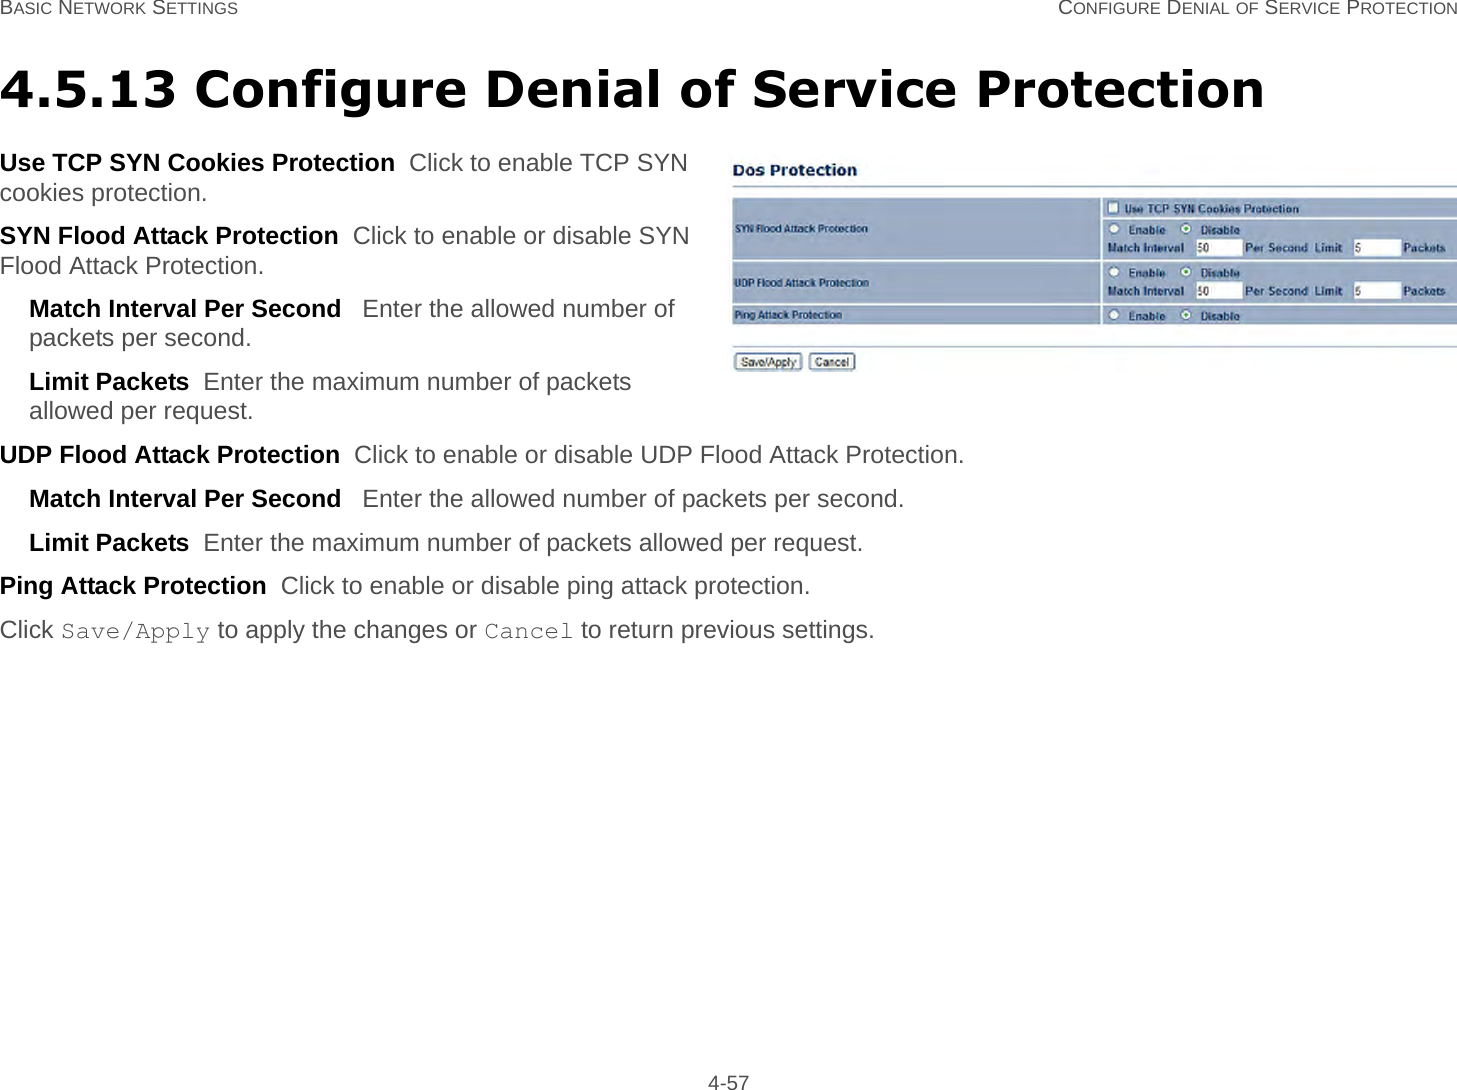 BASIC NETWORK SETTINGS CONFIGURE DENIAL OF SERVICE PROTECTION 4-574.5.13 Configure Denial of Service ProtectionUse TCP SYN Cookies Protection  Click to enable TCP SYN cookies protection.SYN Flood Attack Protection  Click to enable or disable SYN Flood Attack Protection.Match Interval Per Second   Enter the allowed number of packets per second.Limit Packets  Enter the maximum number of packets allowed per request.UDP Flood Attack Protection  Click to enable or disable UDP Flood Attack Protection.Match Interval Per Second   Enter the allowed number of packets per second.Limit Packets  Enter the maximum number of packets allowed per request.Ping Attack Protection  Click to enable or disable ping attack protection.Click Save/Apply to apply the changes or Cancel to return previous settings.